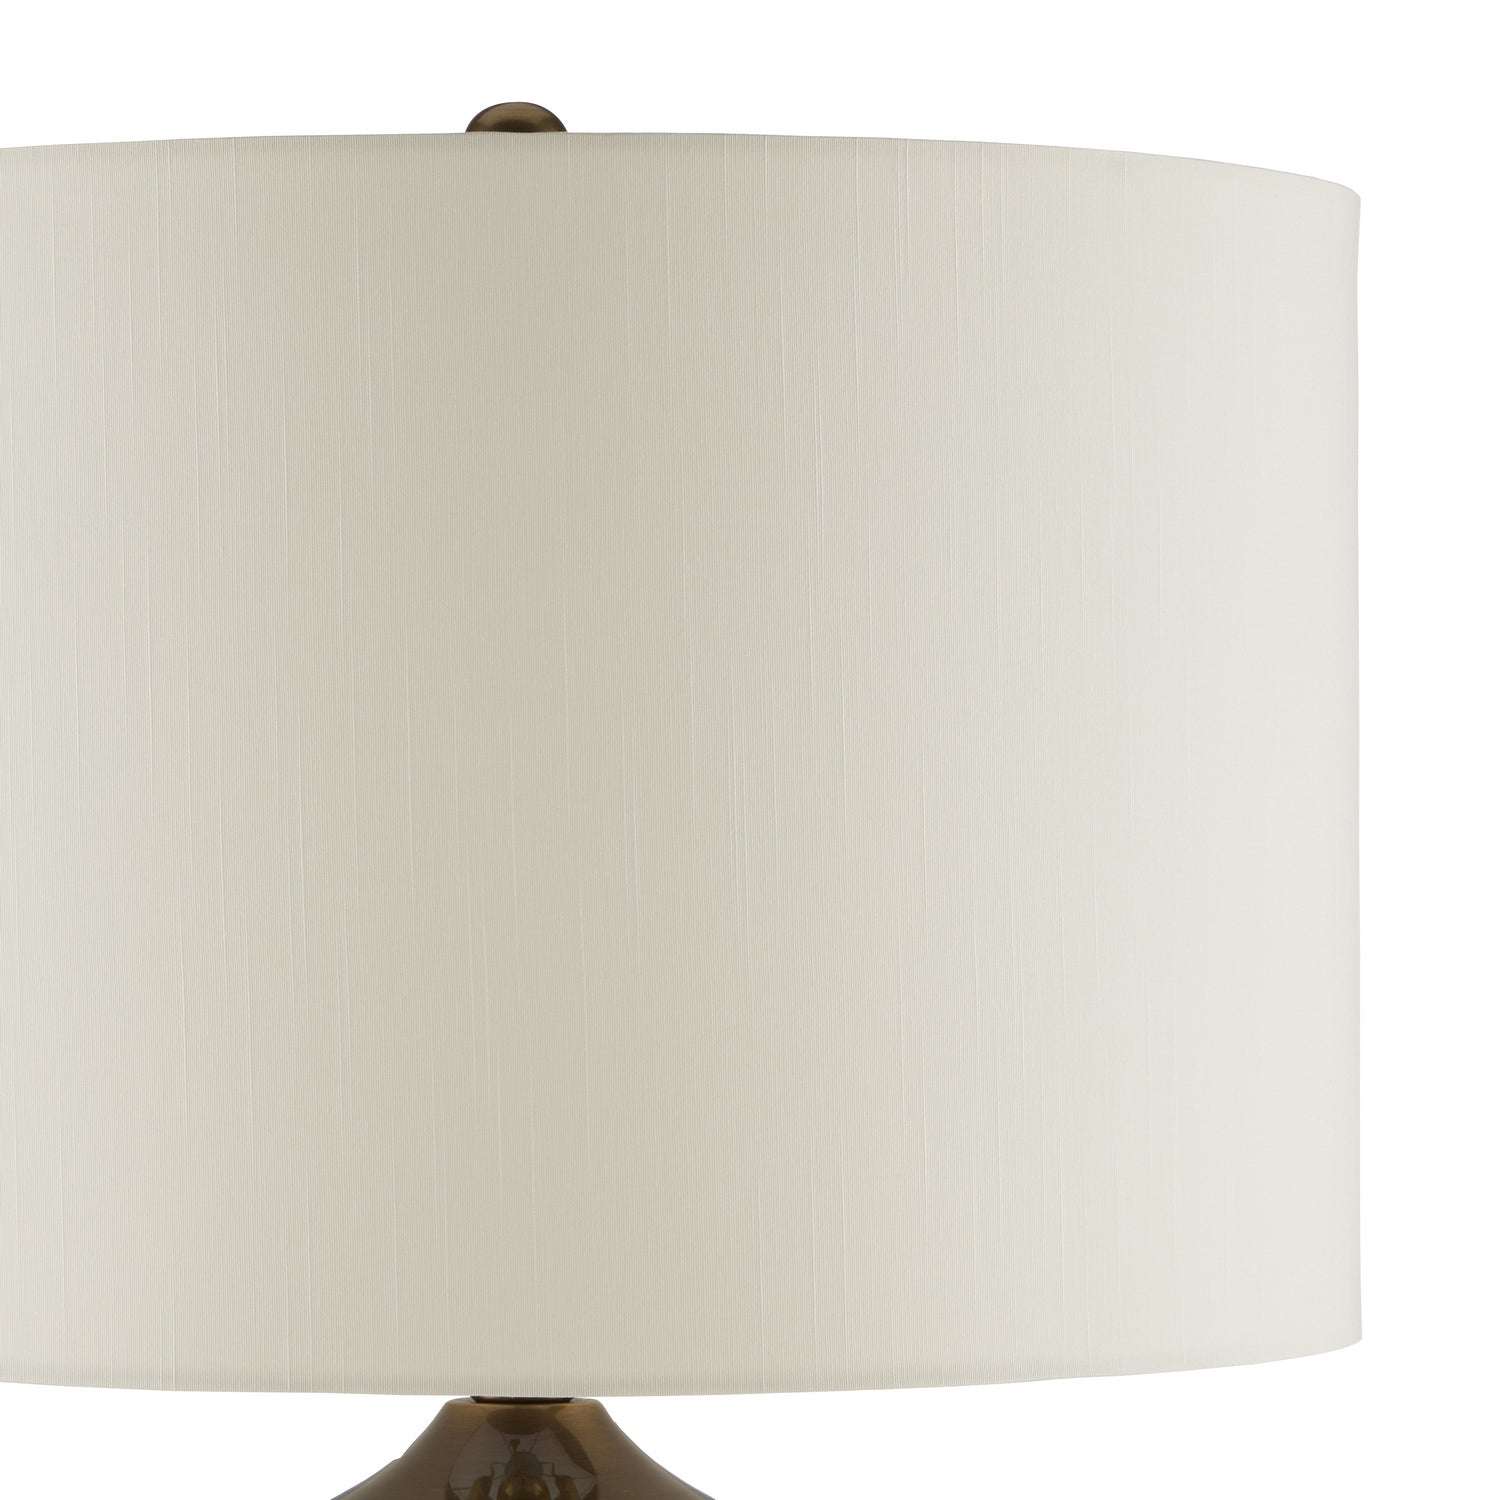 One Light Table Lamp from the Lilou collection in Blue/Antique Brass finish